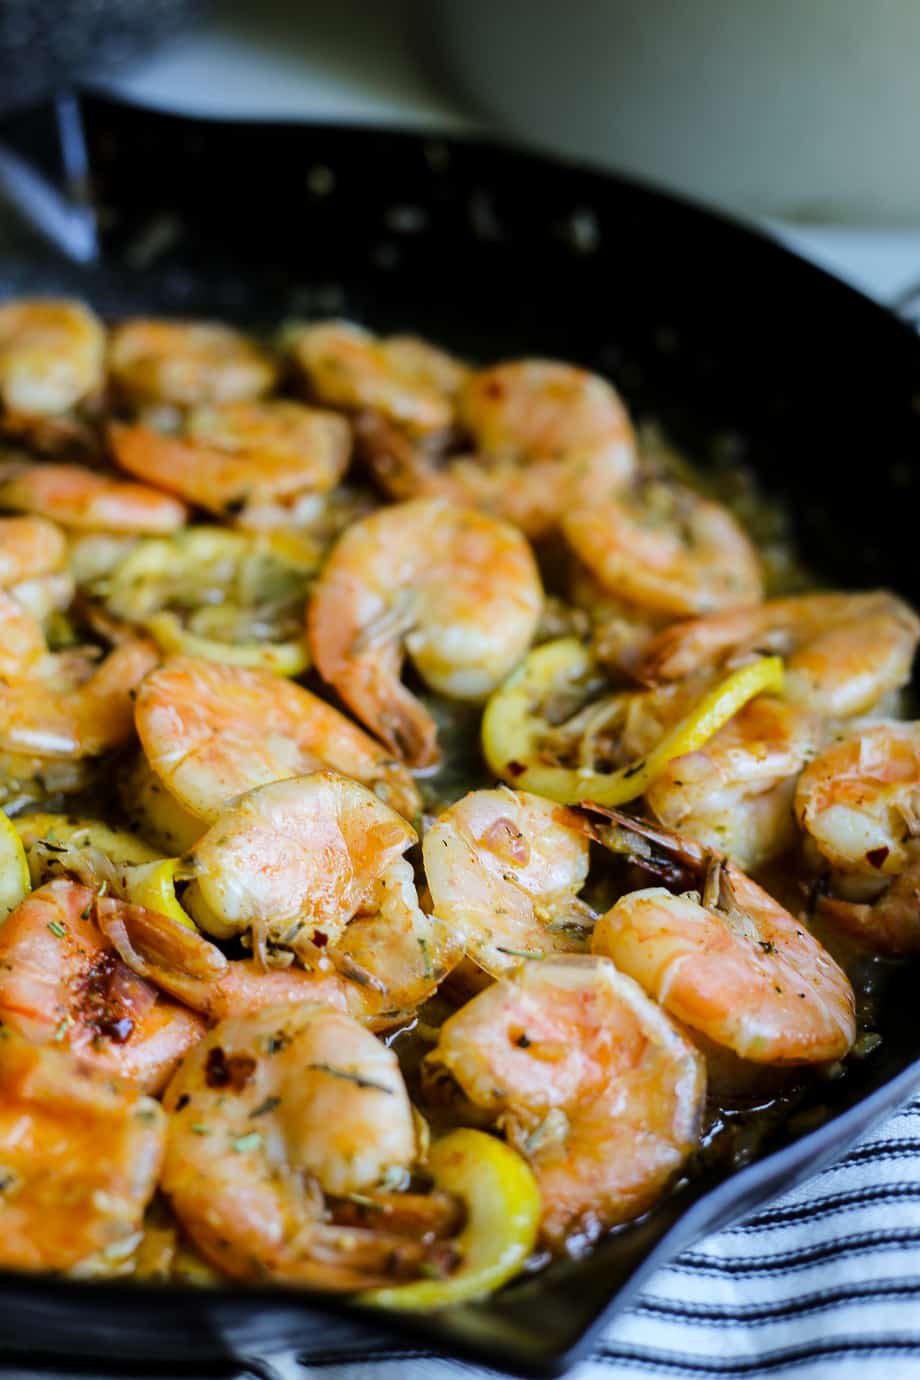 New Orleans-Style Barbecued Shrimp